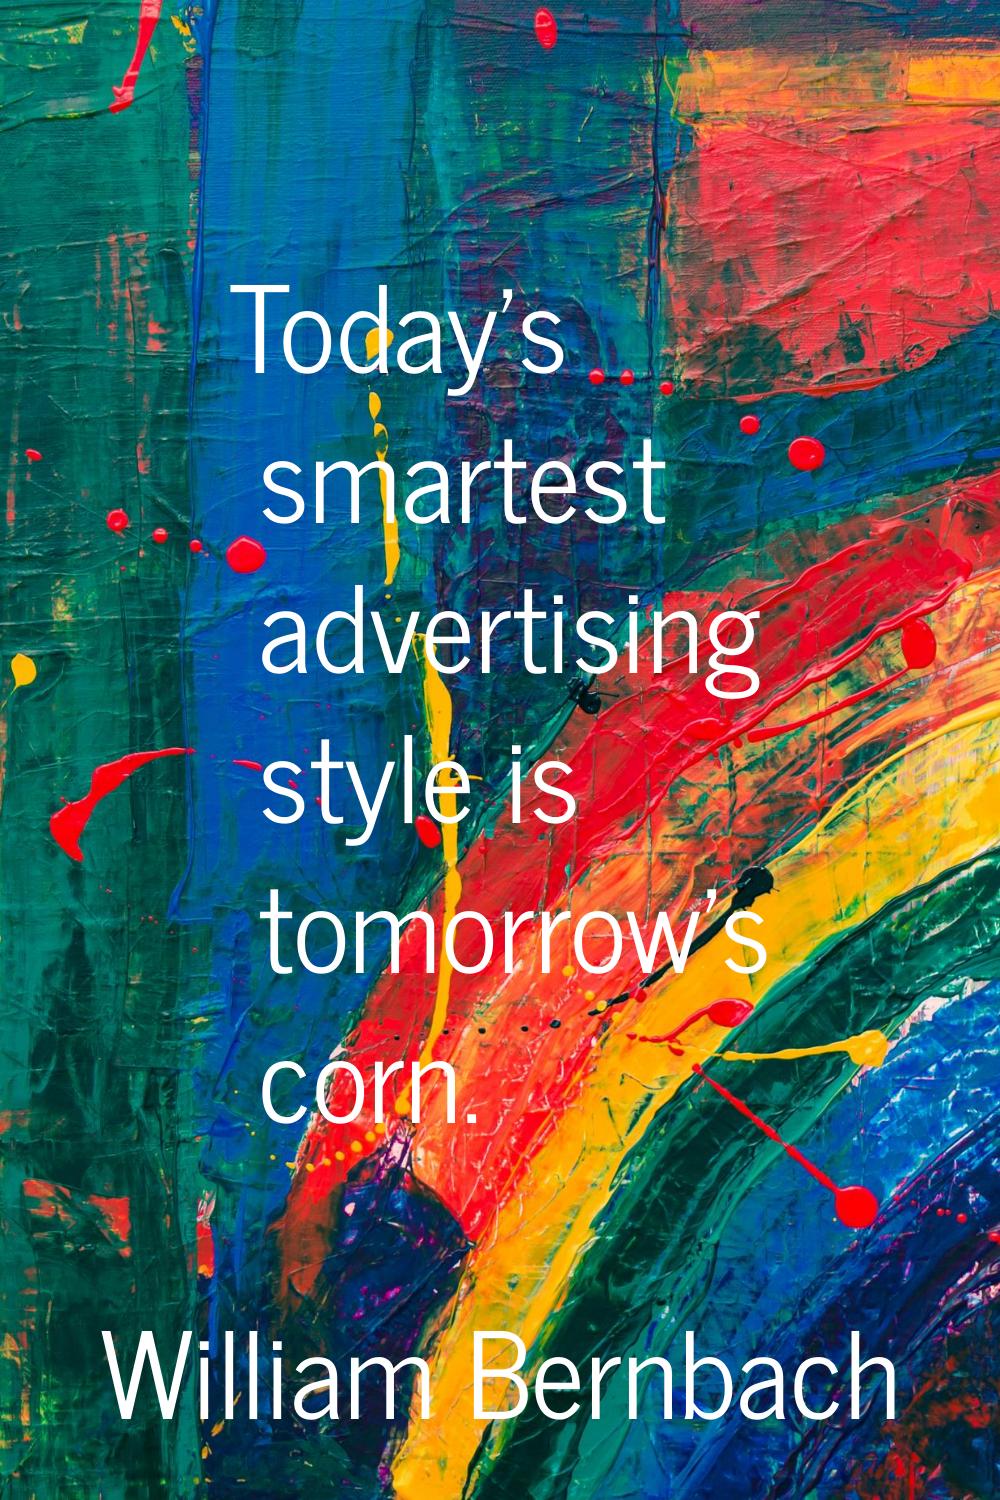 Today's smartest advertising style is tomorrow's corn.